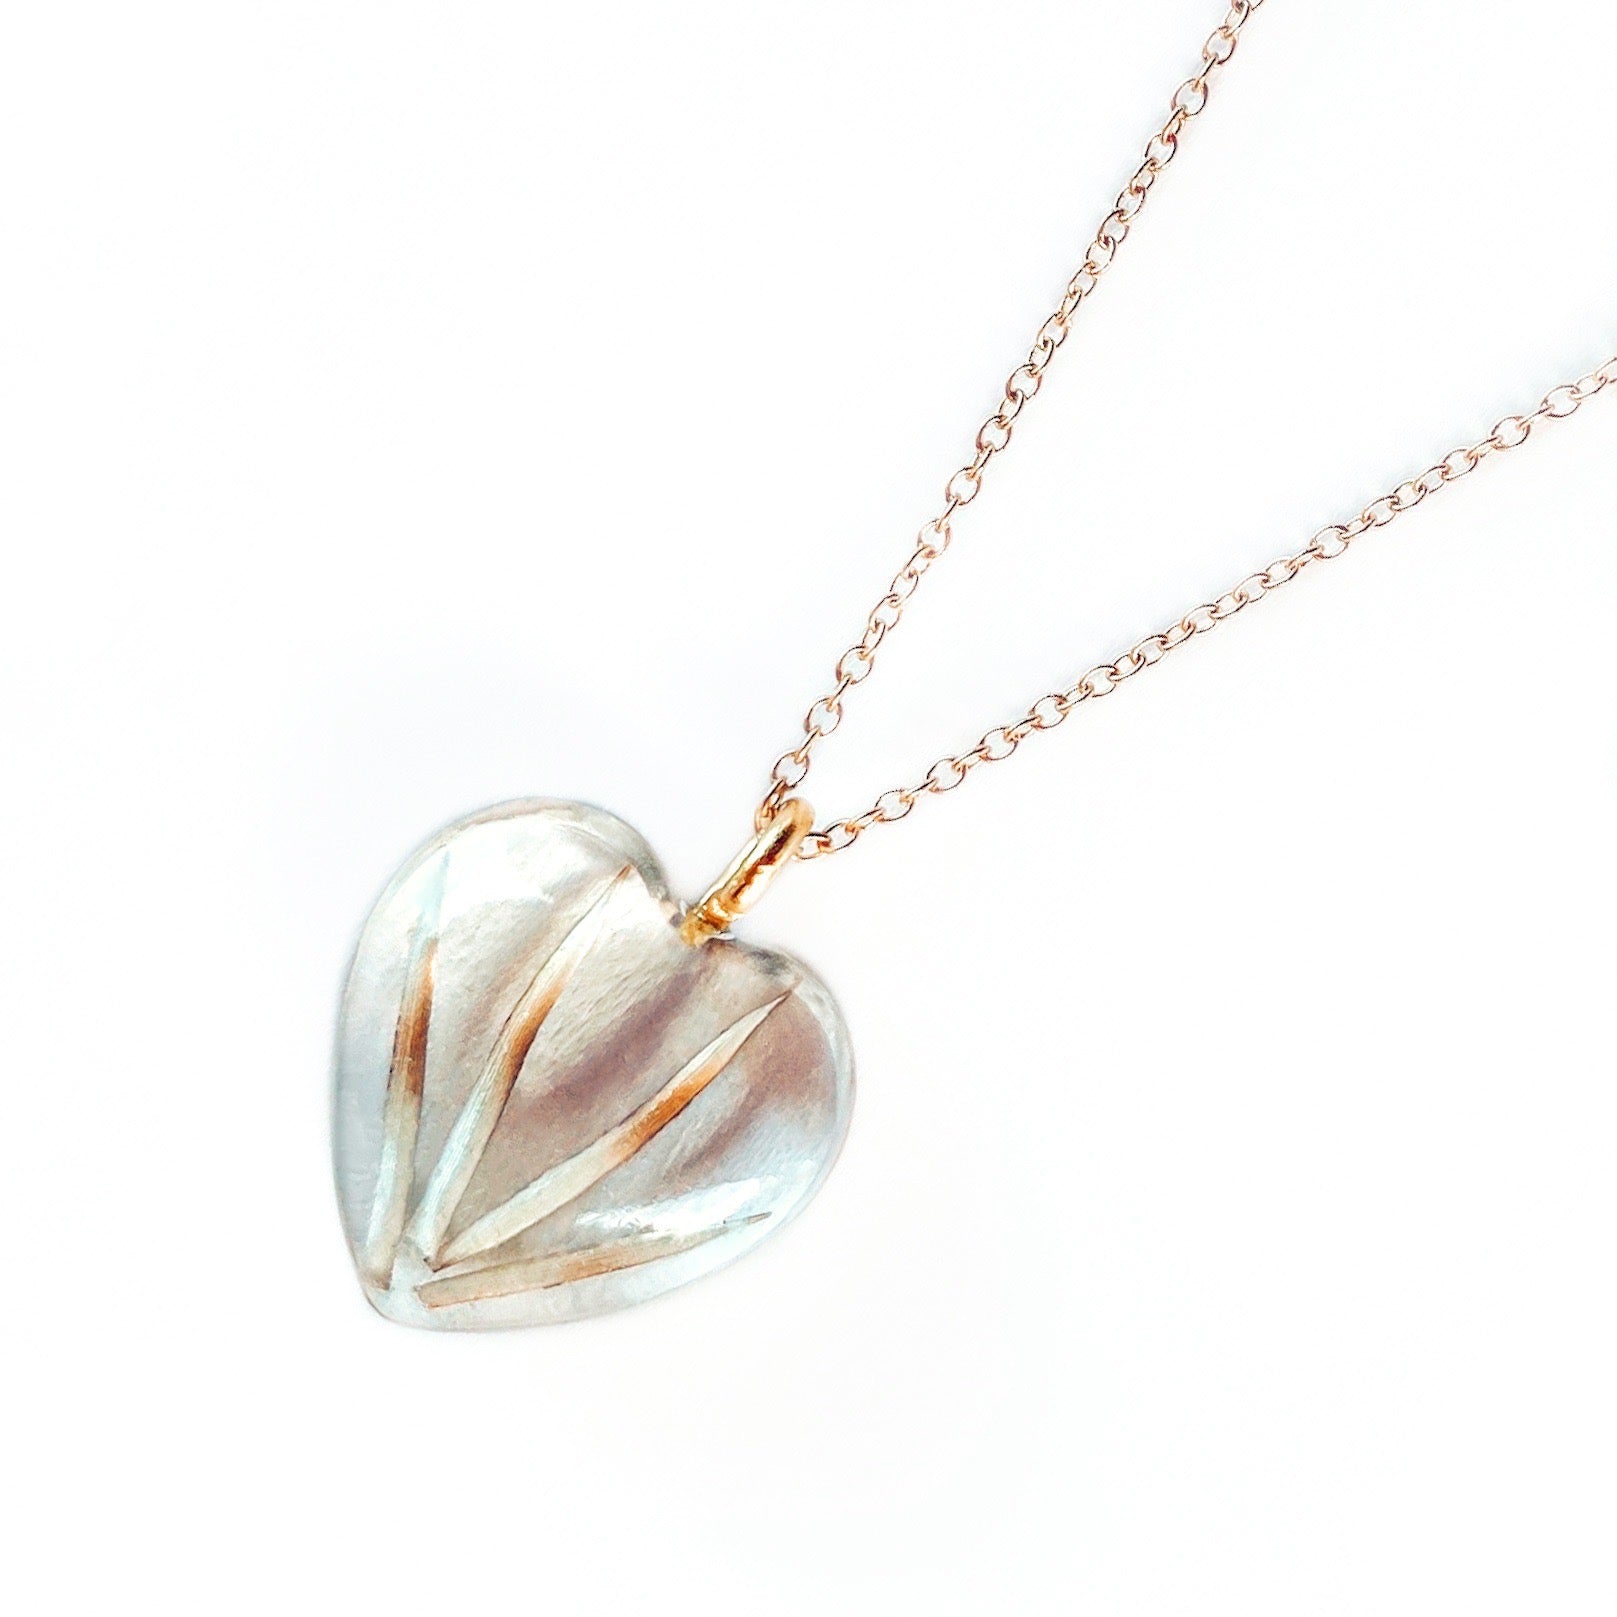 Tiny Personalized Heart Necklace